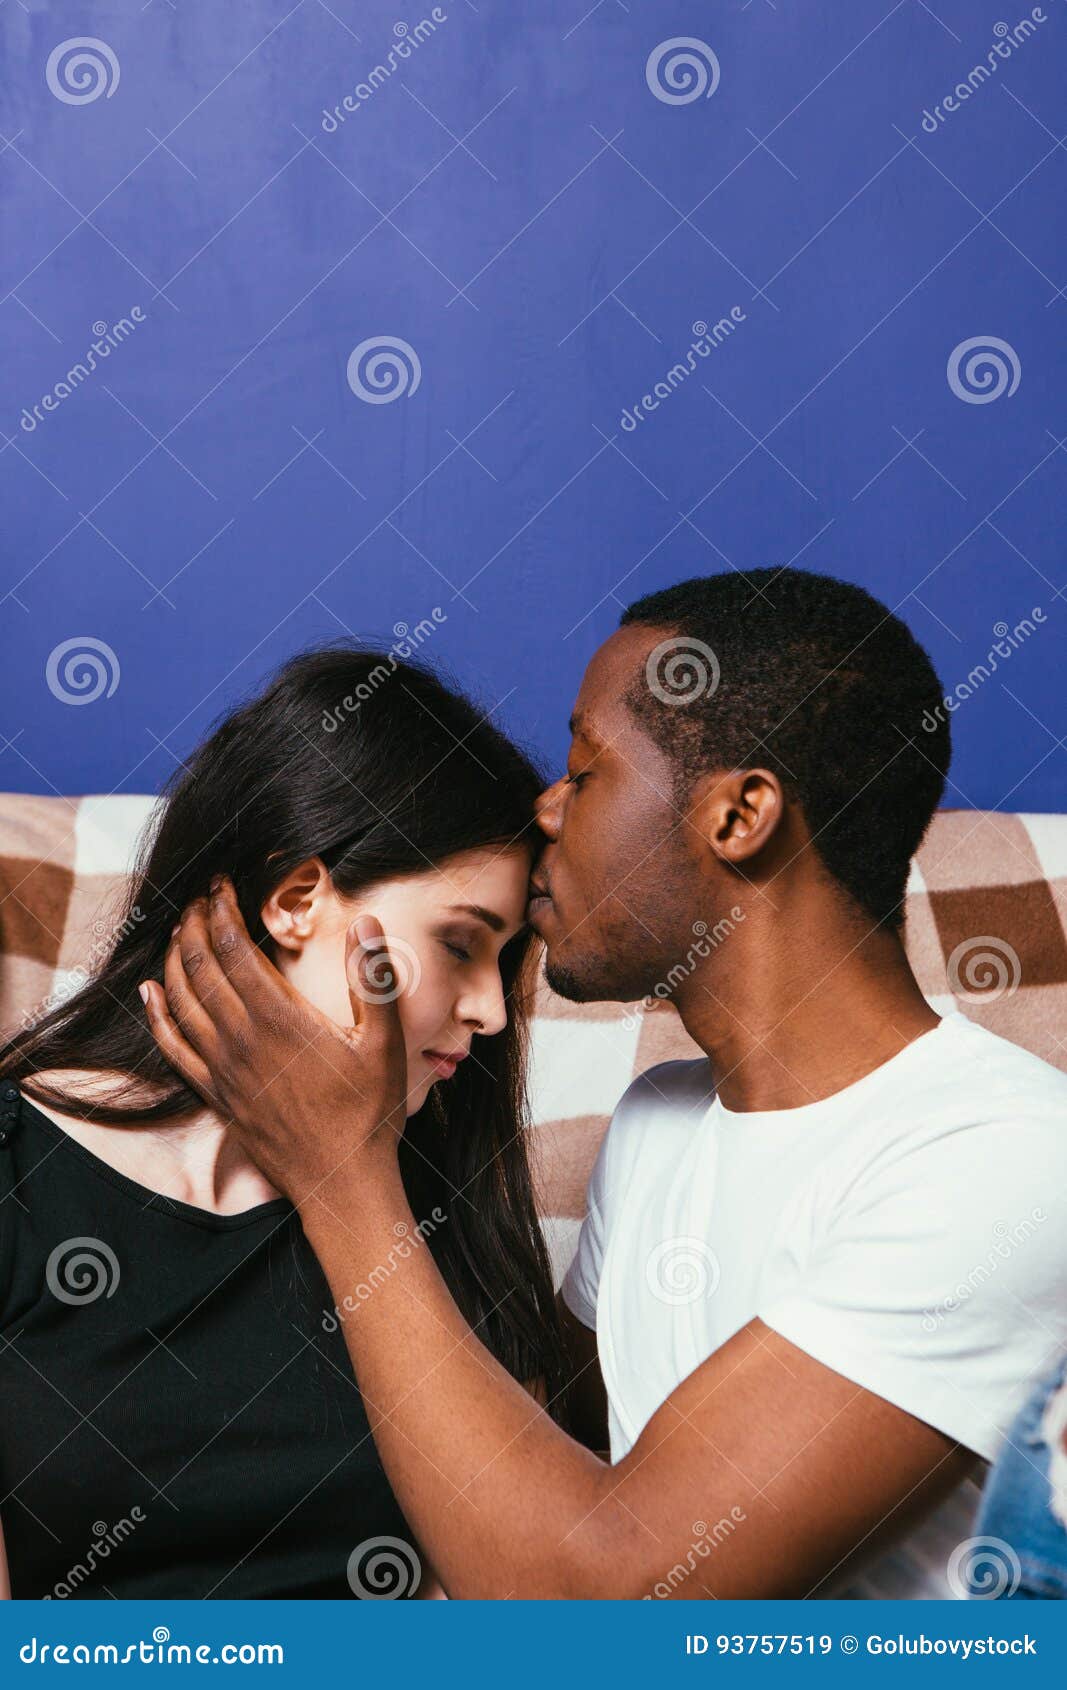 Black Man and White Woman Together, Kiss Forehead Stock Image photo